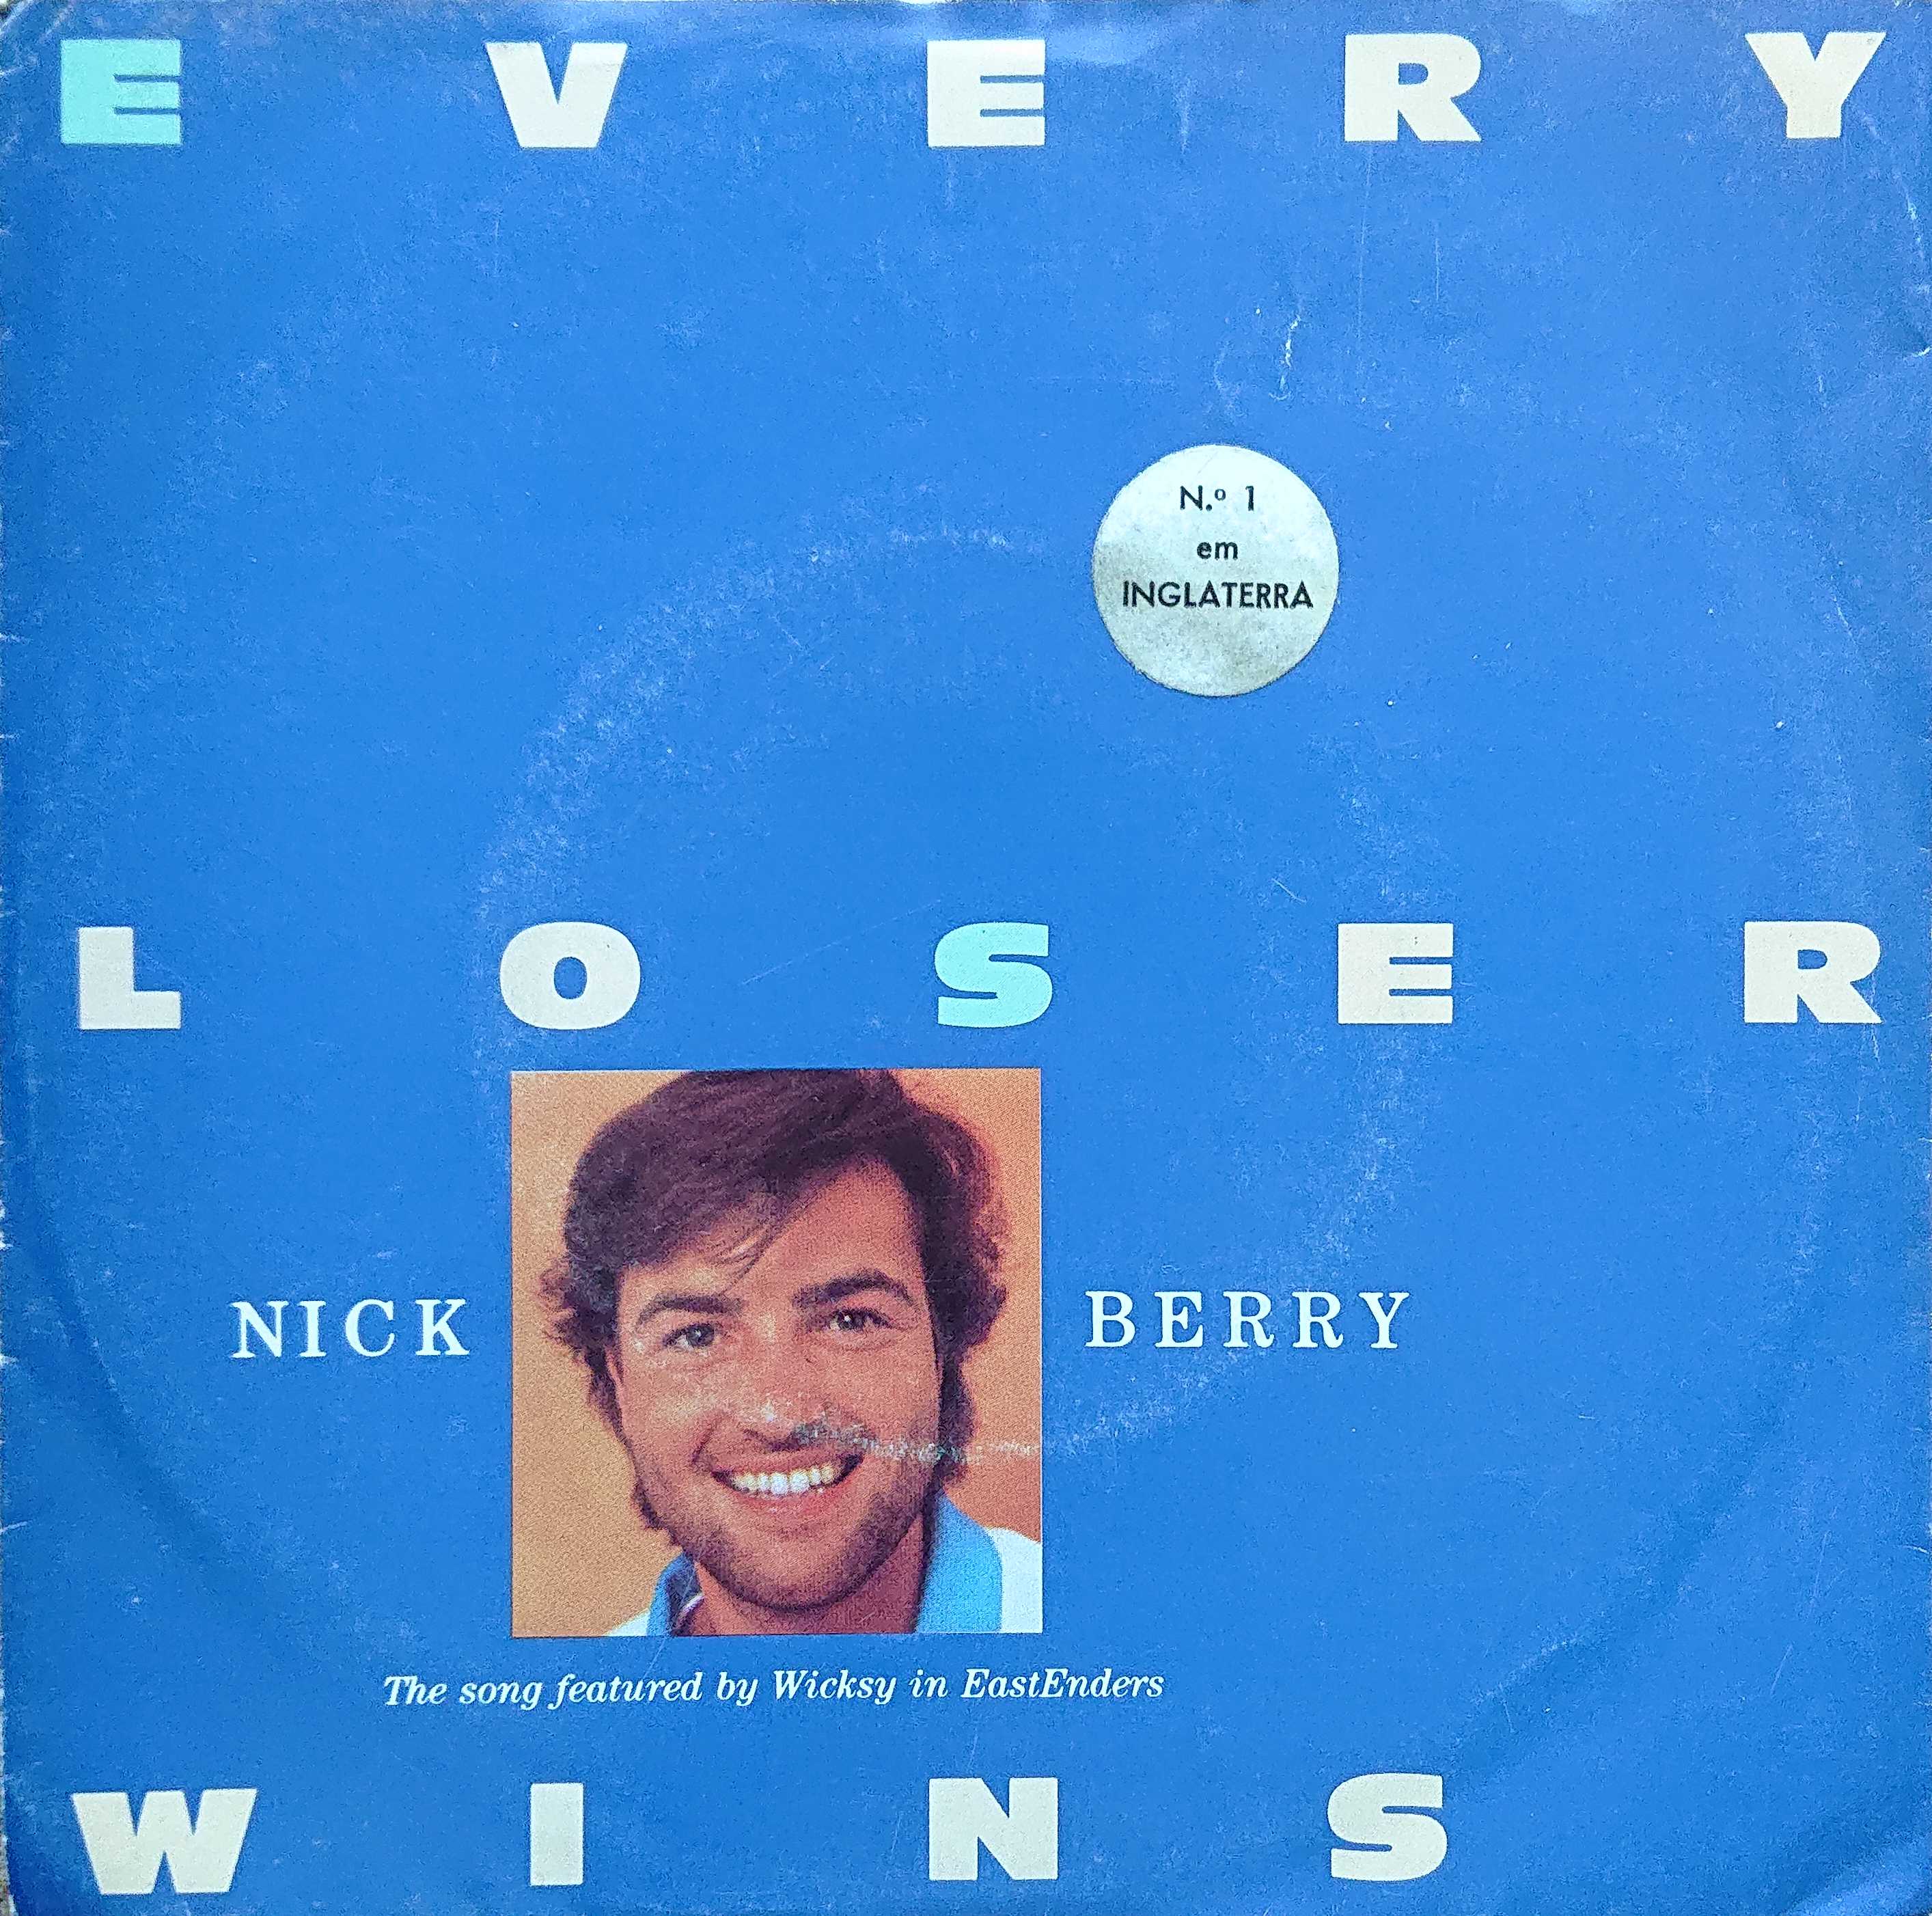 Picture of RESL 204-iPO Every loser wins (Portuguese import) by artist Simon May / Stewart and Bradley James from the BBC singles - Records and Tapes library